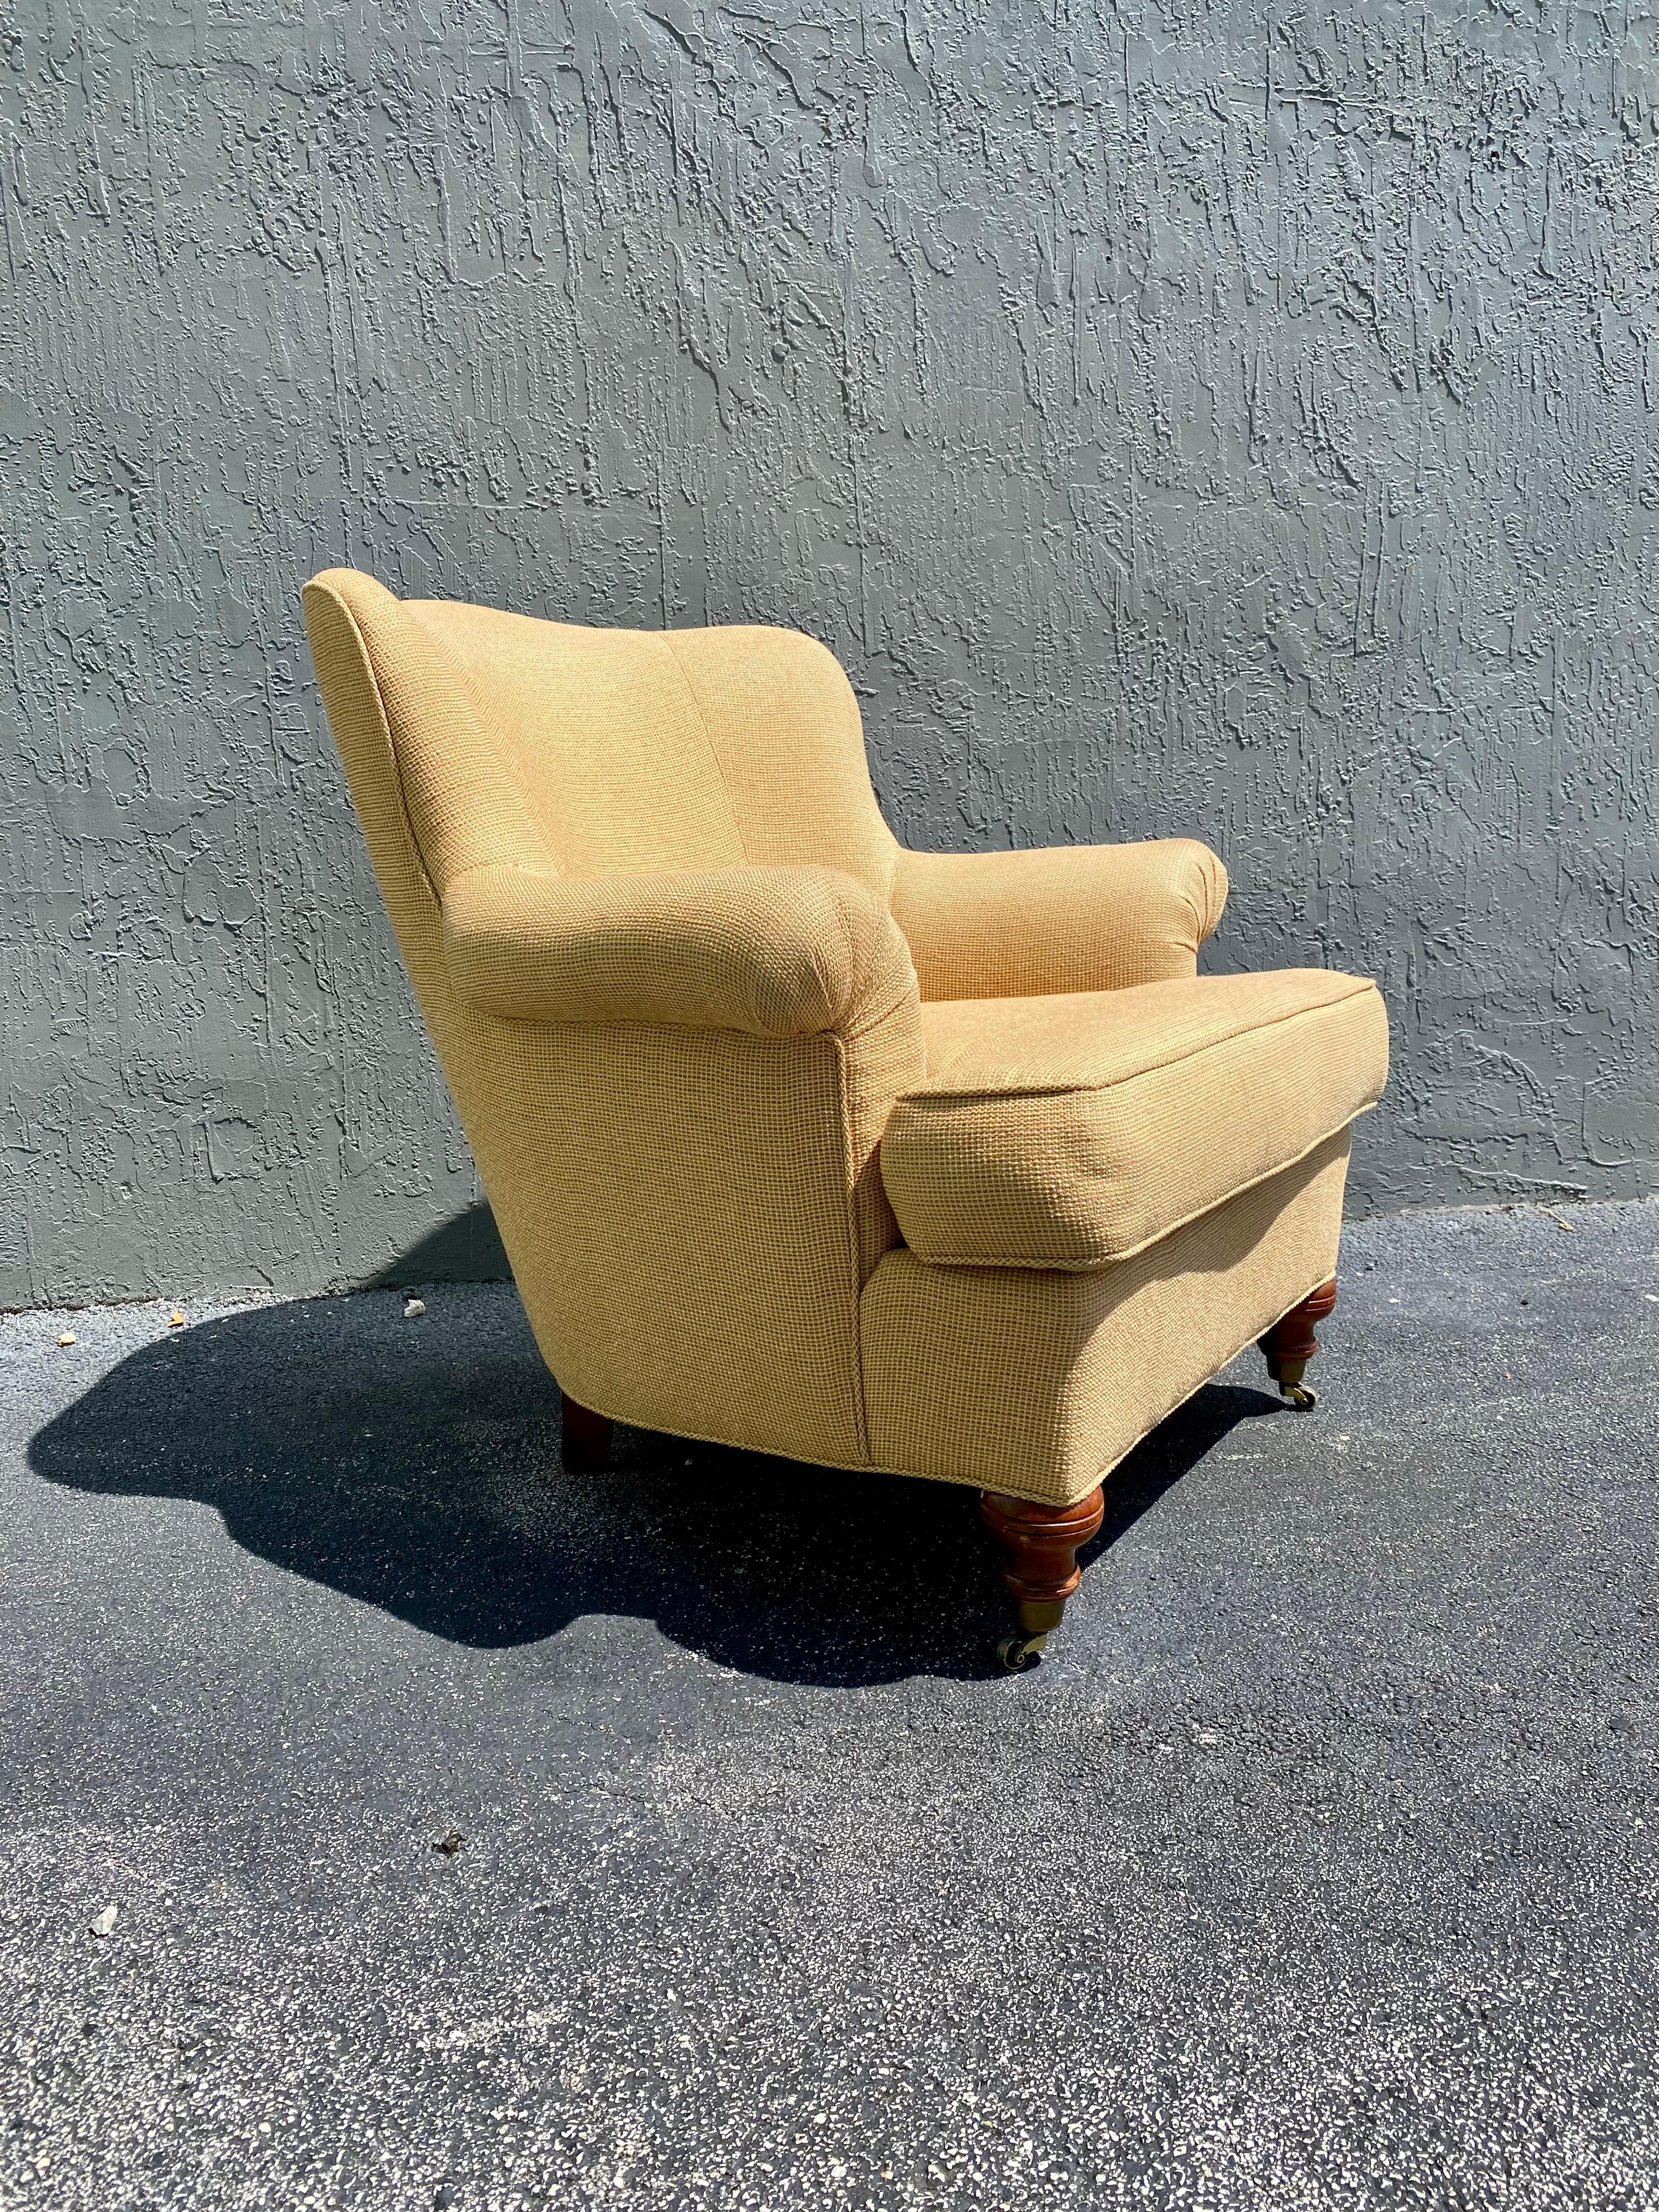 1980s Ralph Lauren Style Large Tweed Library Castors Chair  In Good Condition For Sale In Fort Lauderdale, FL